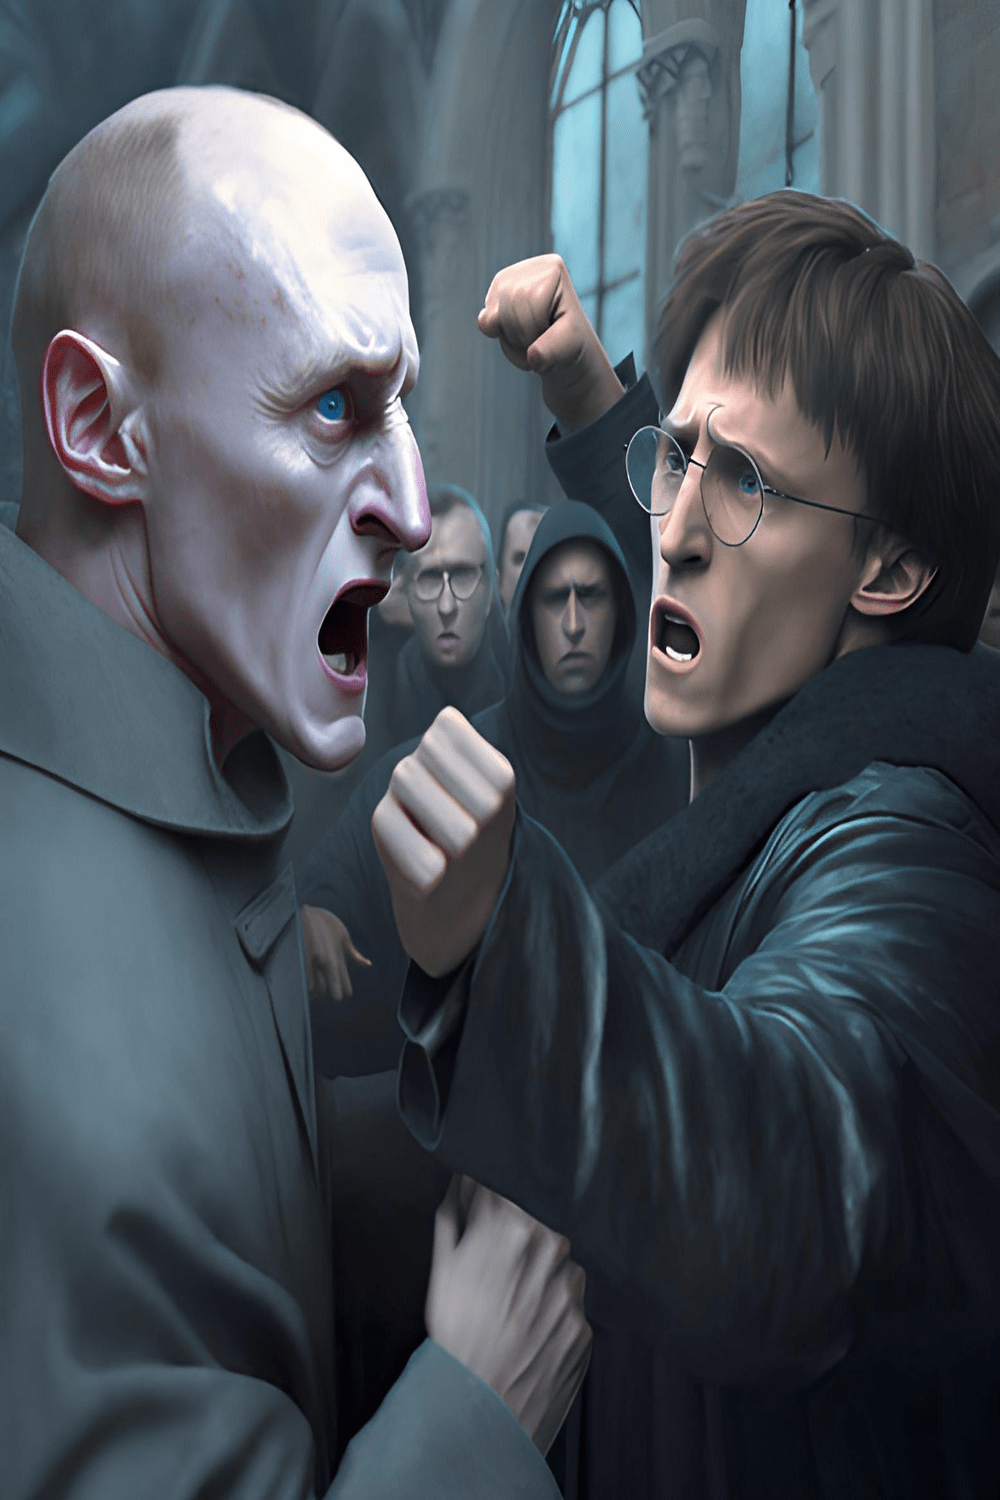 harry potter fights with putin who is depicted as evil pinterest preview image.